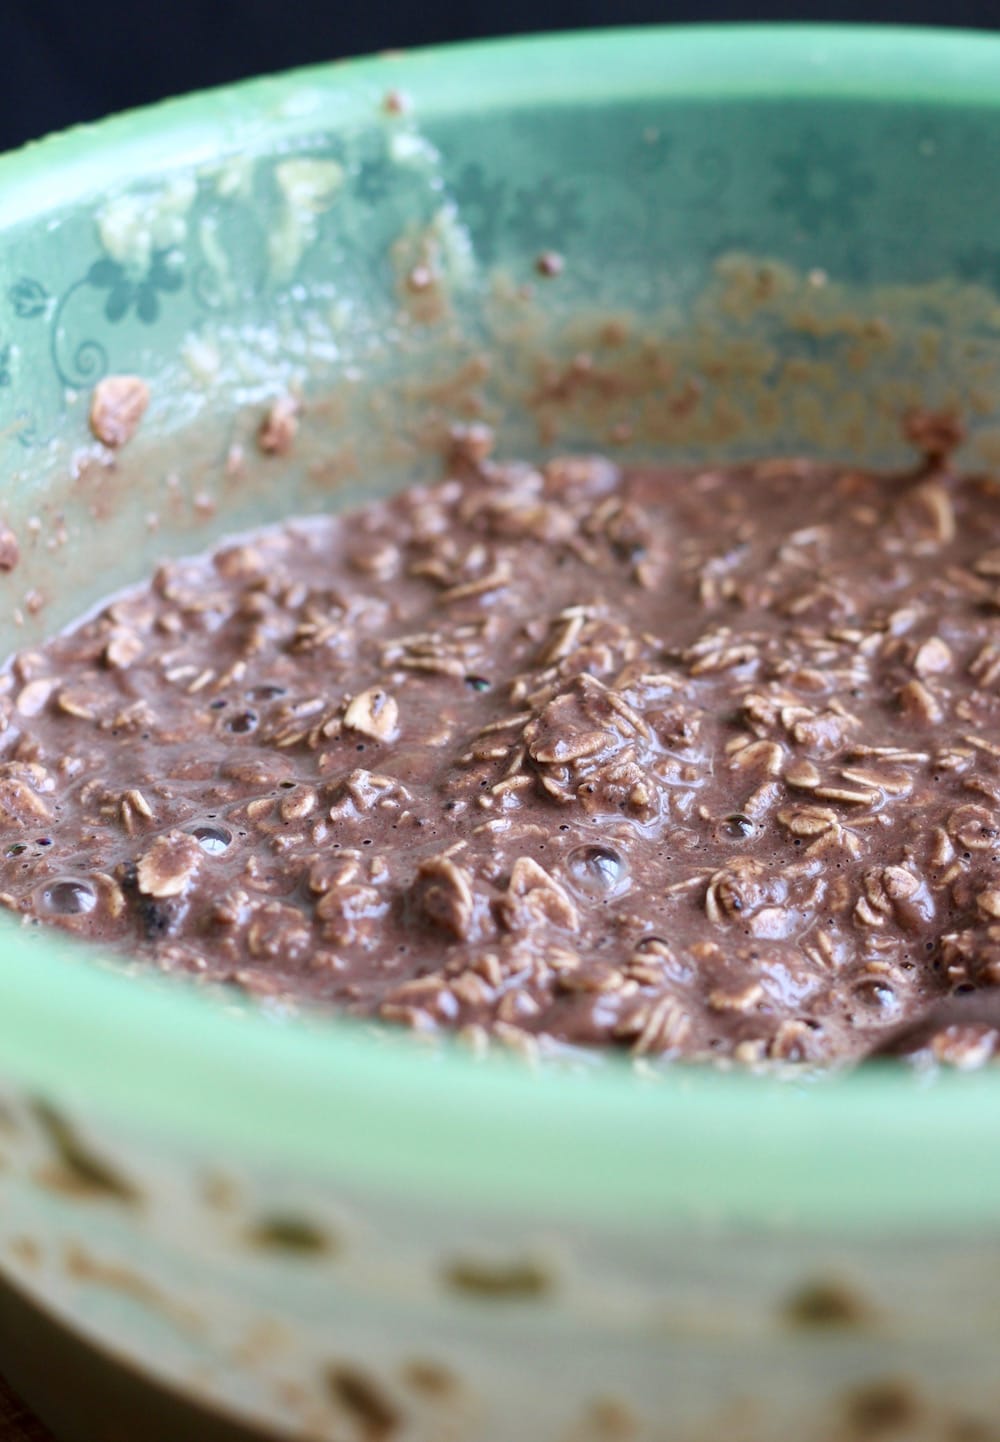 A green mixing bowl filled with a chocolate oatmeal batter.